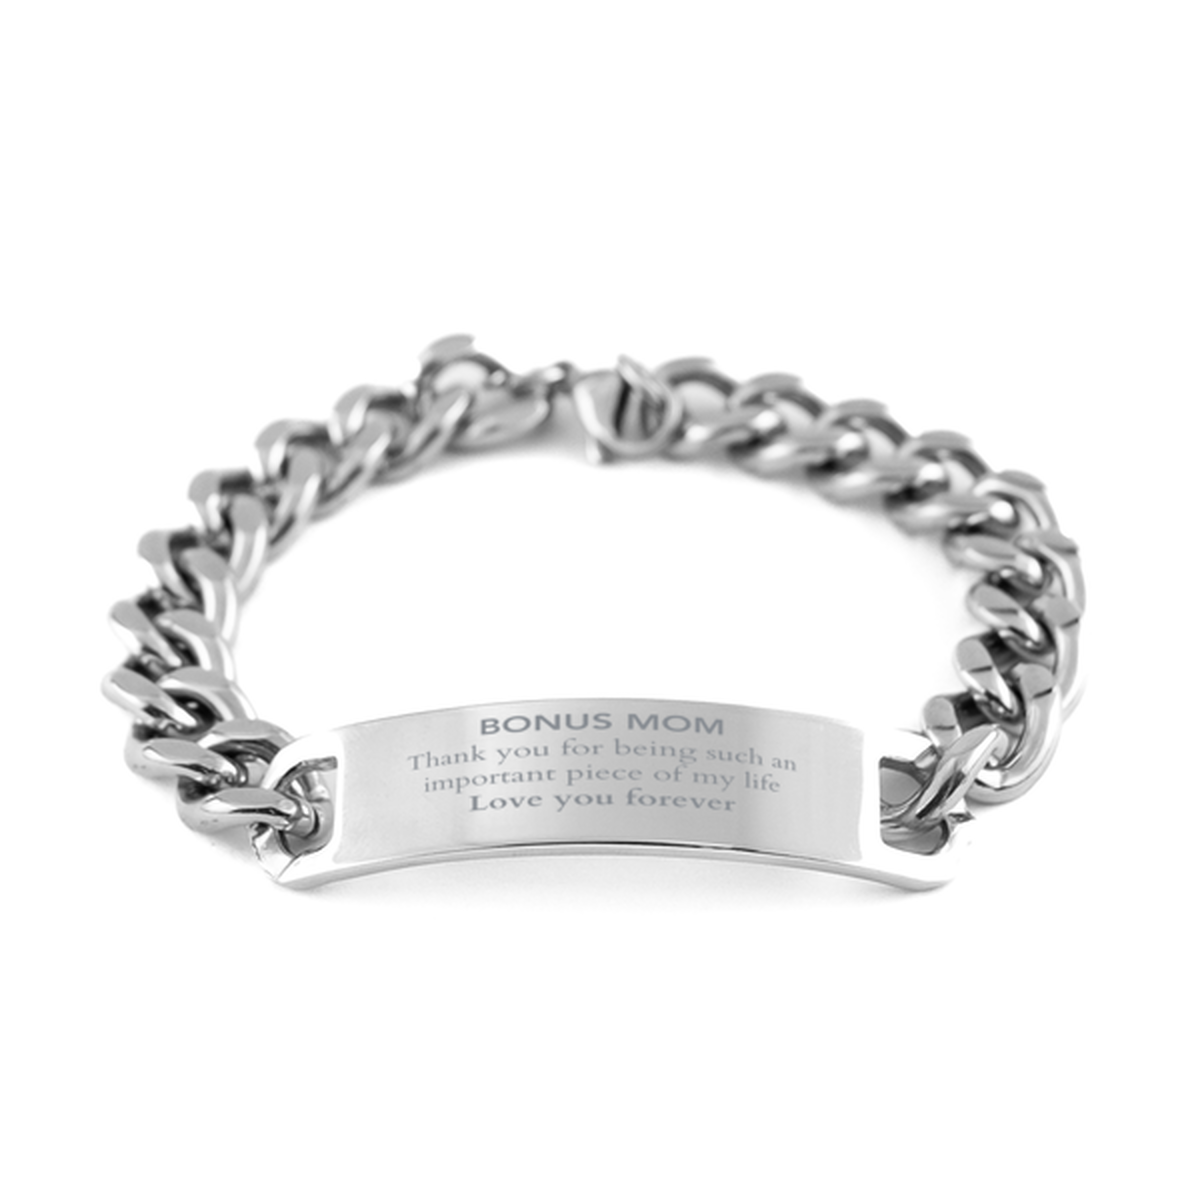 Appropriate Bonus Mom Cuban Chain Stainless Steel Bracelet Epic Birthday Gifts for Bonus Mom Thank you for being such an important piece of my life Bonus Mom Christmas Mothers Fathers Day